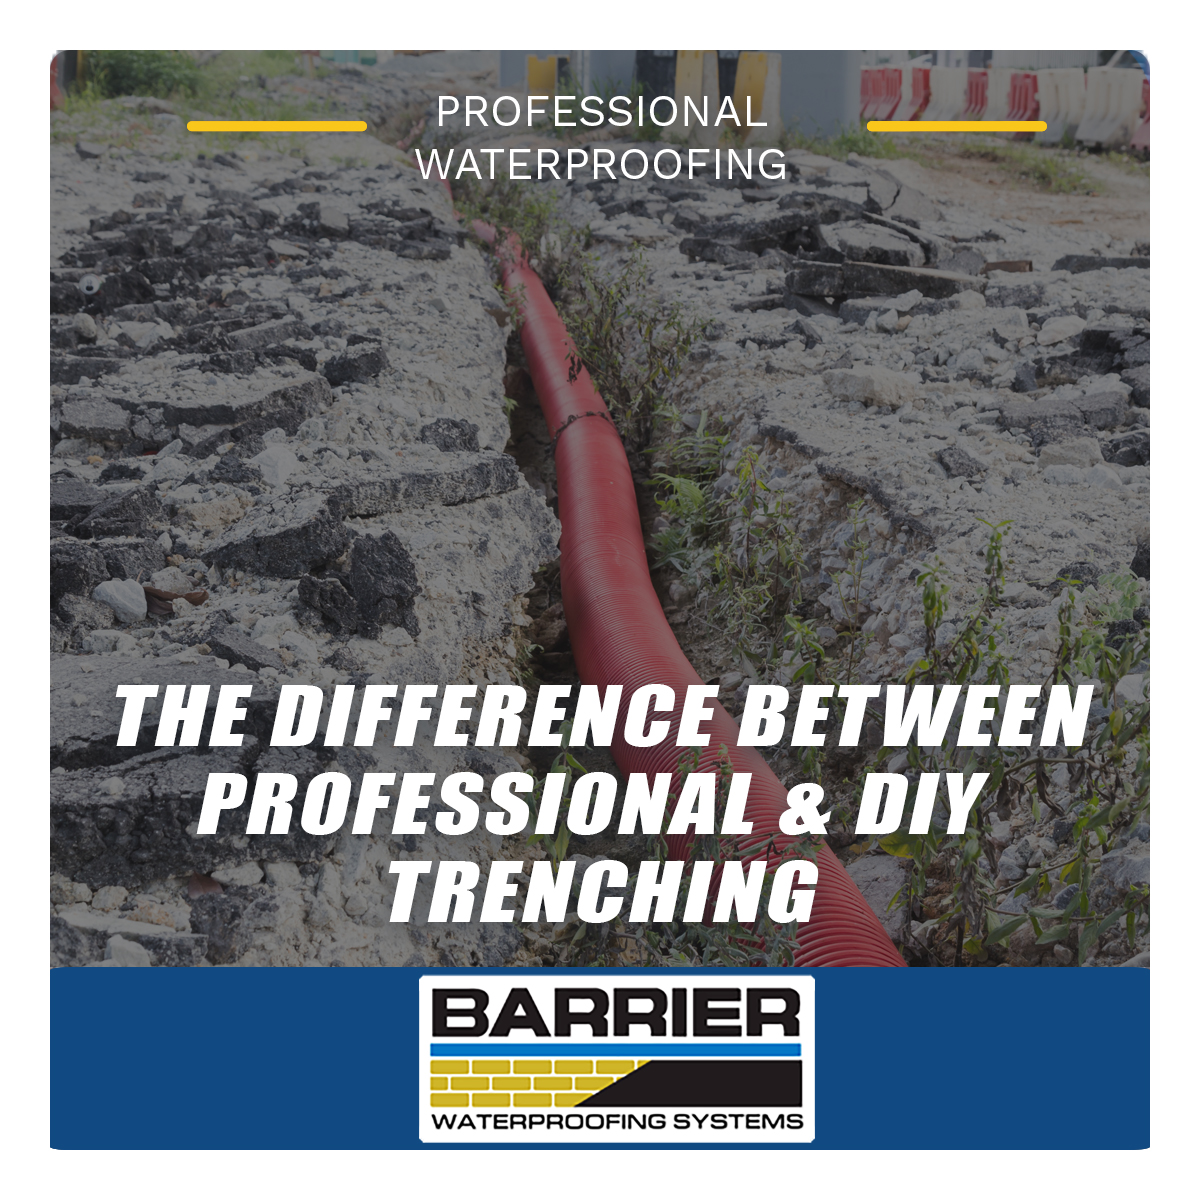 The-Difference-Between-Professional-Trenching-and-DIY-Trenching